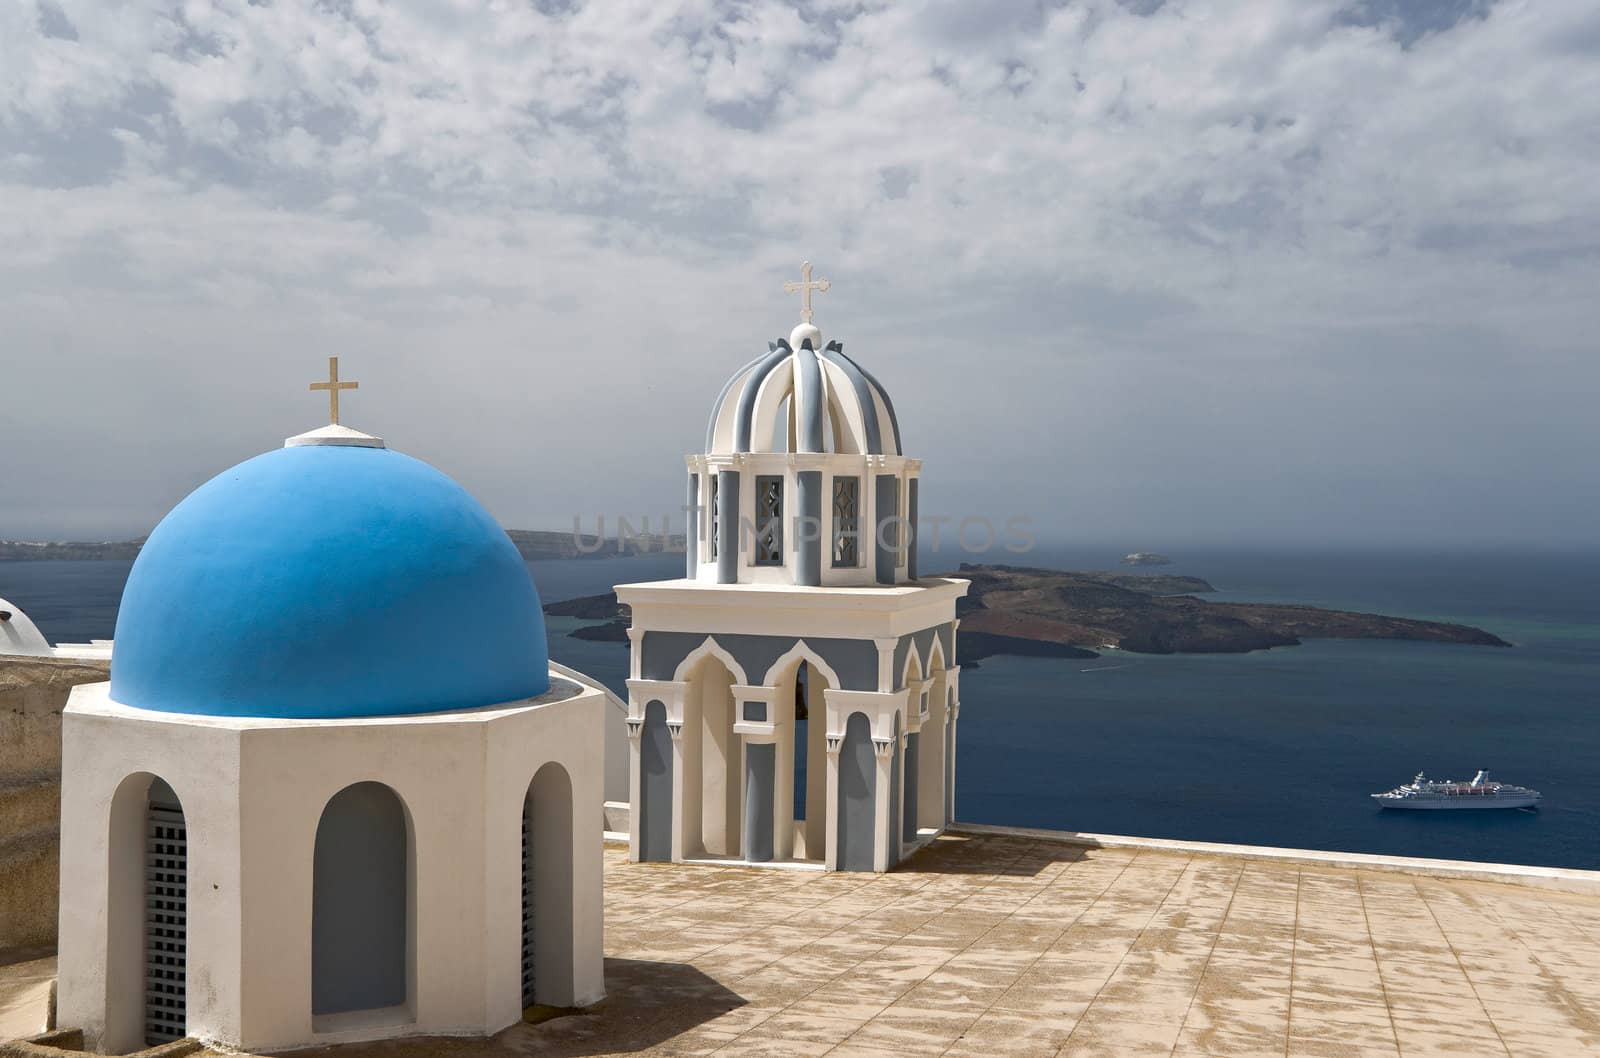 Caldera view in Santorini island with cupolas of churches and ships